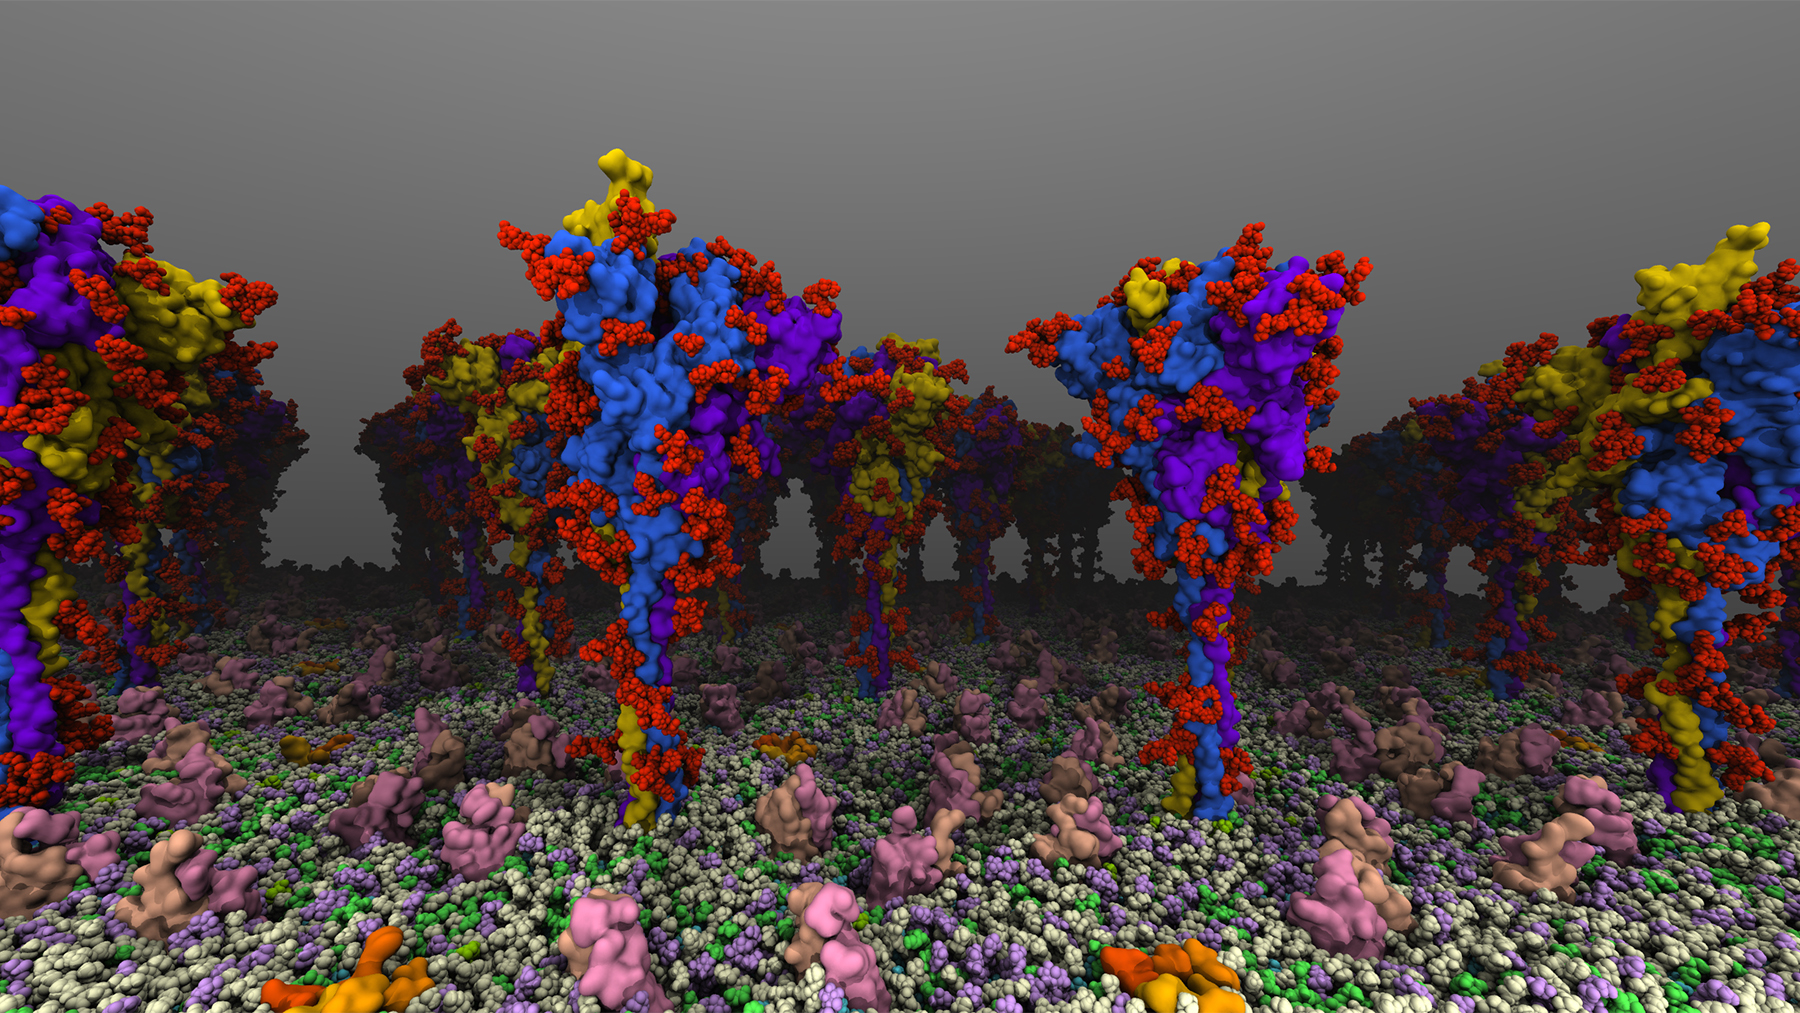 models of the spike protein that plays a key role in COVID-19 infection and immunity. Image courtesy of Tianle Chen